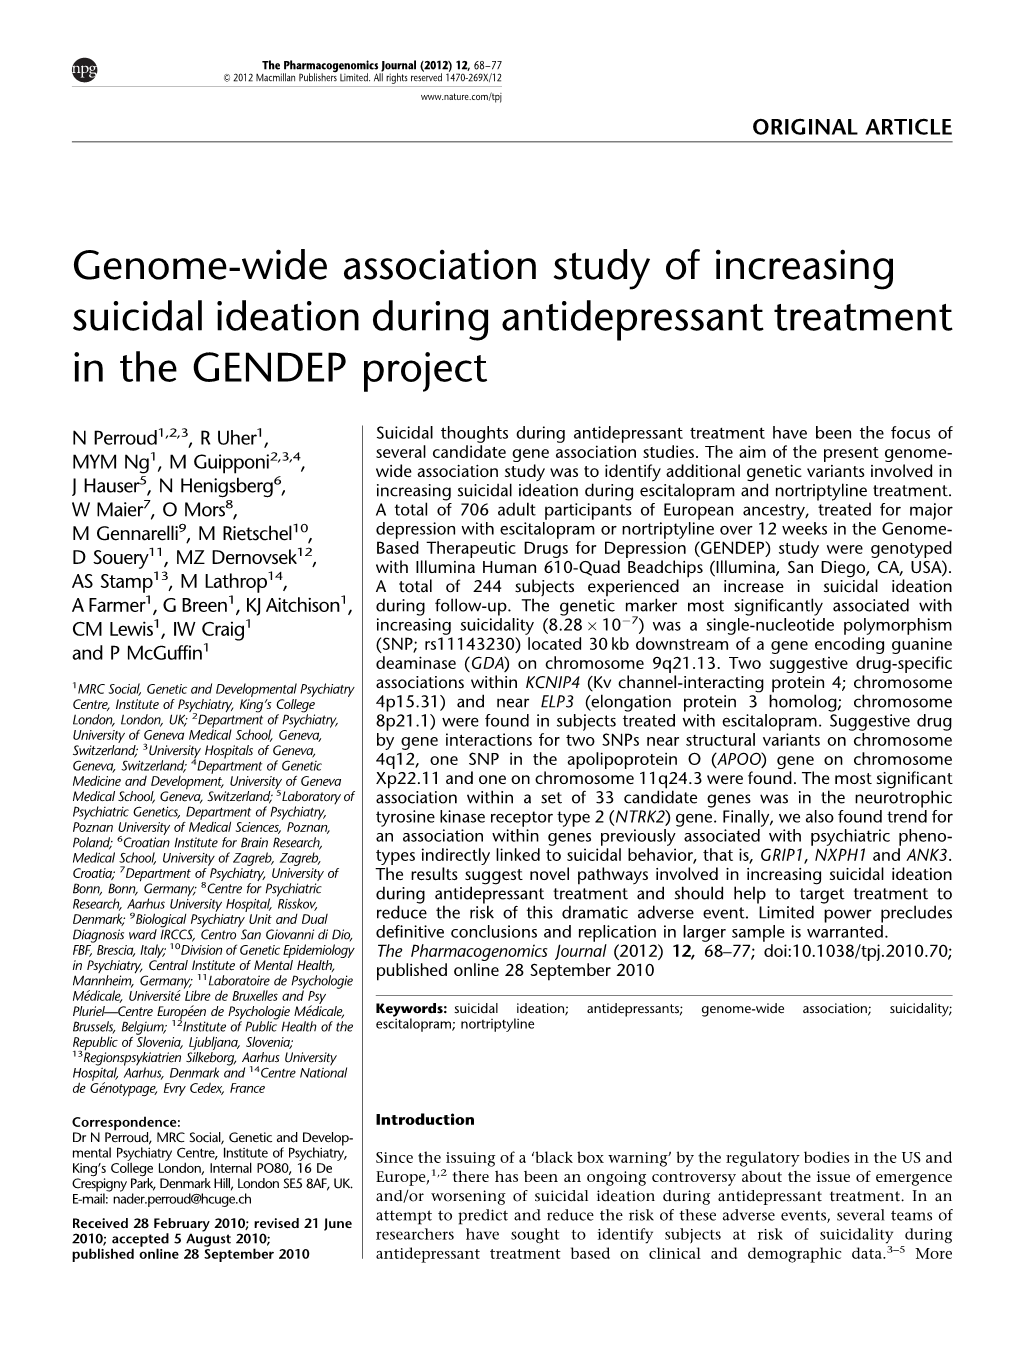 Genome-Wide Association Study of Increasing Suicidal Ideation During Antidepressant Treatment in the GENDEP Project